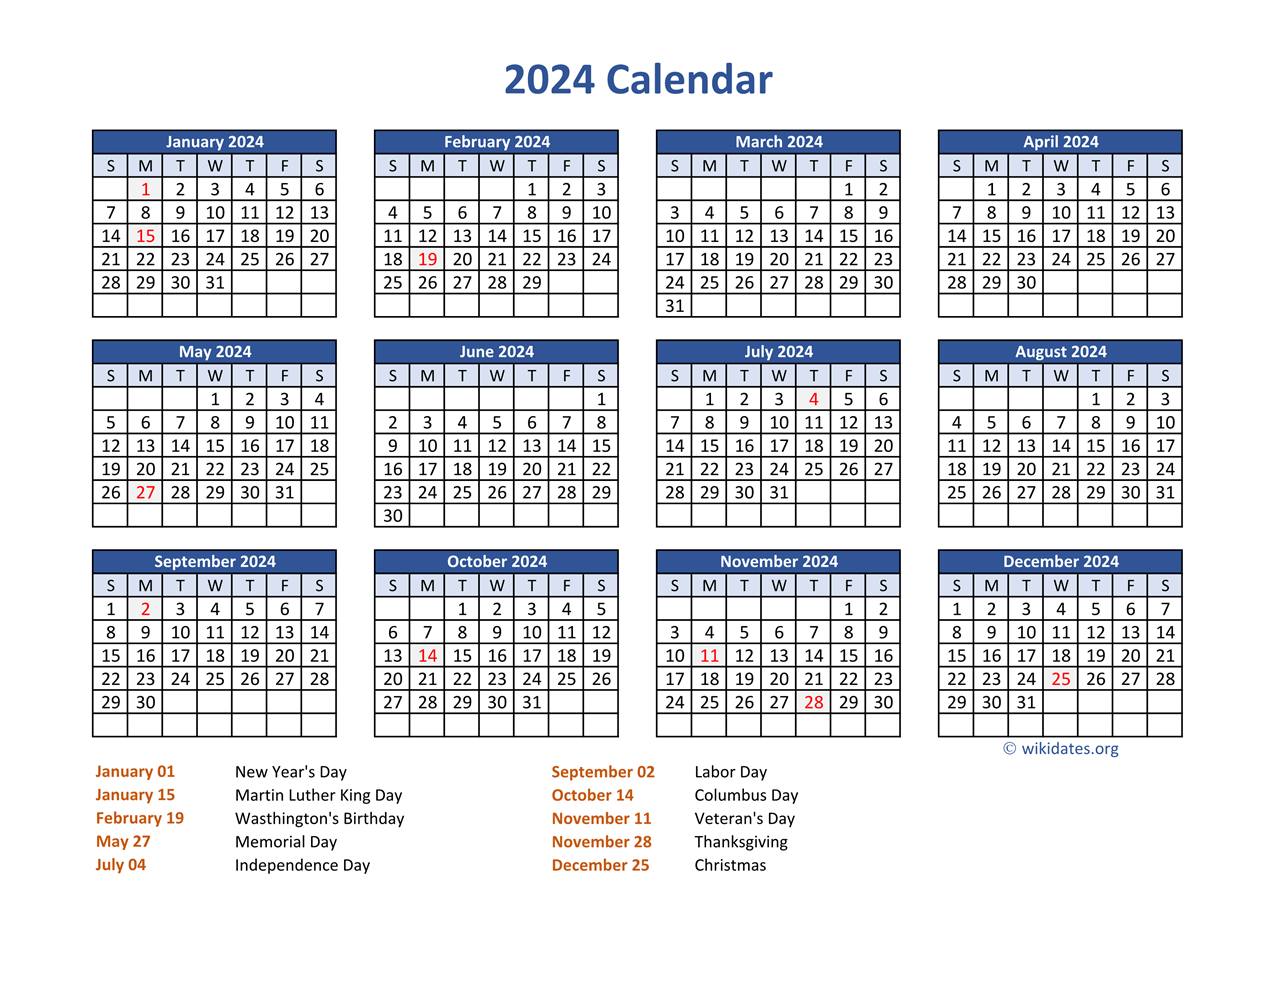 Pdf Calendar 2024 With Federal Holidays | Wikidates for Calendar 2024 Printable With Holidays